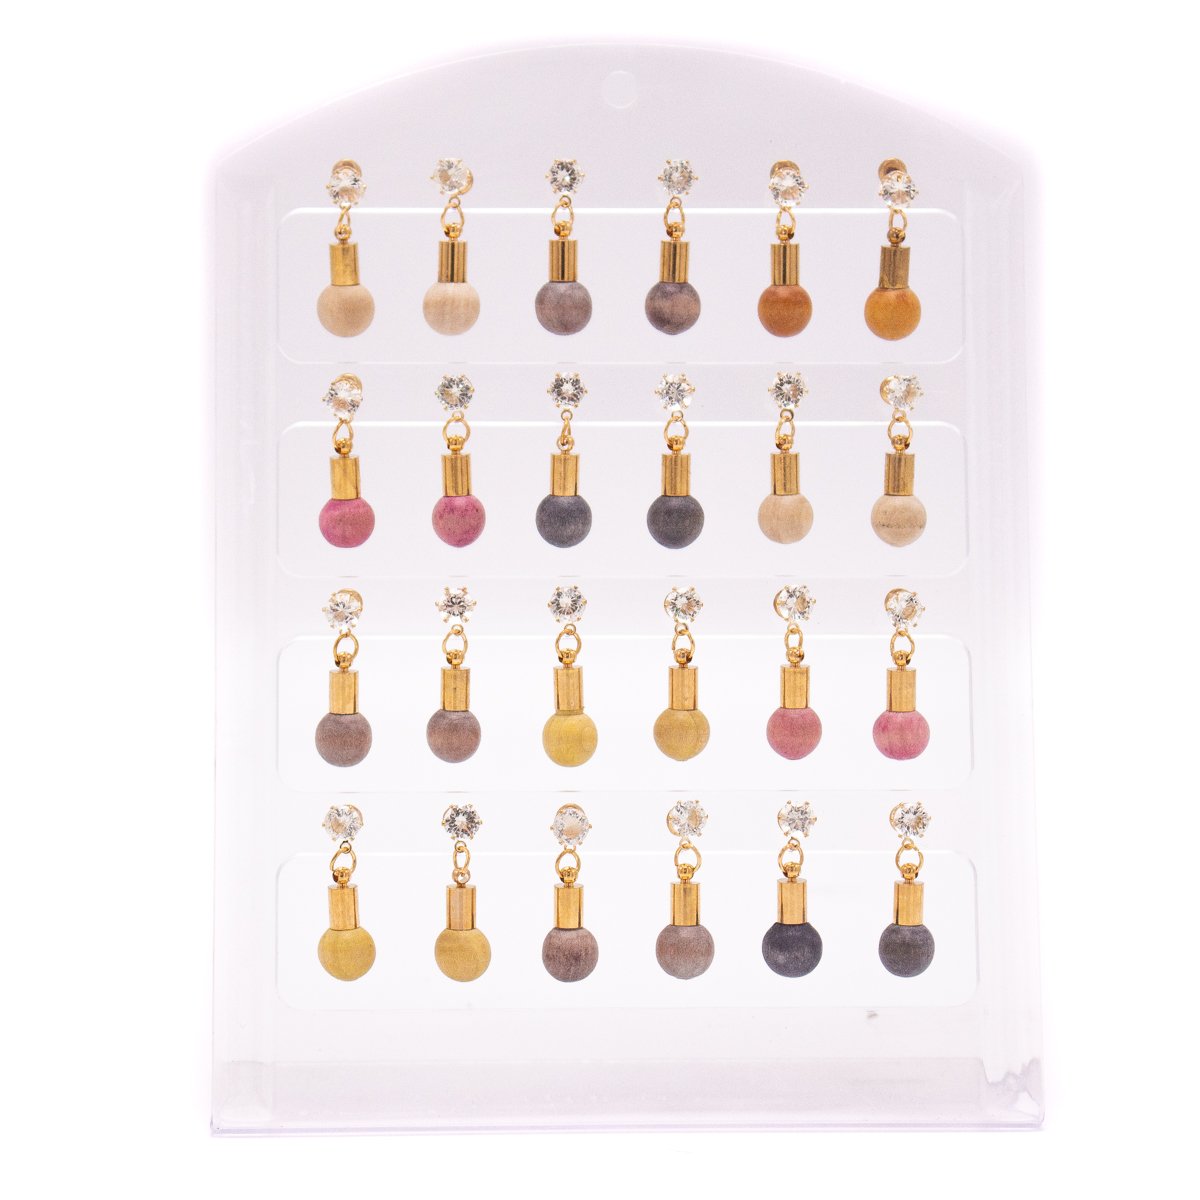 12 Pairs of Wooden Earrings w/ Crystals MER-04